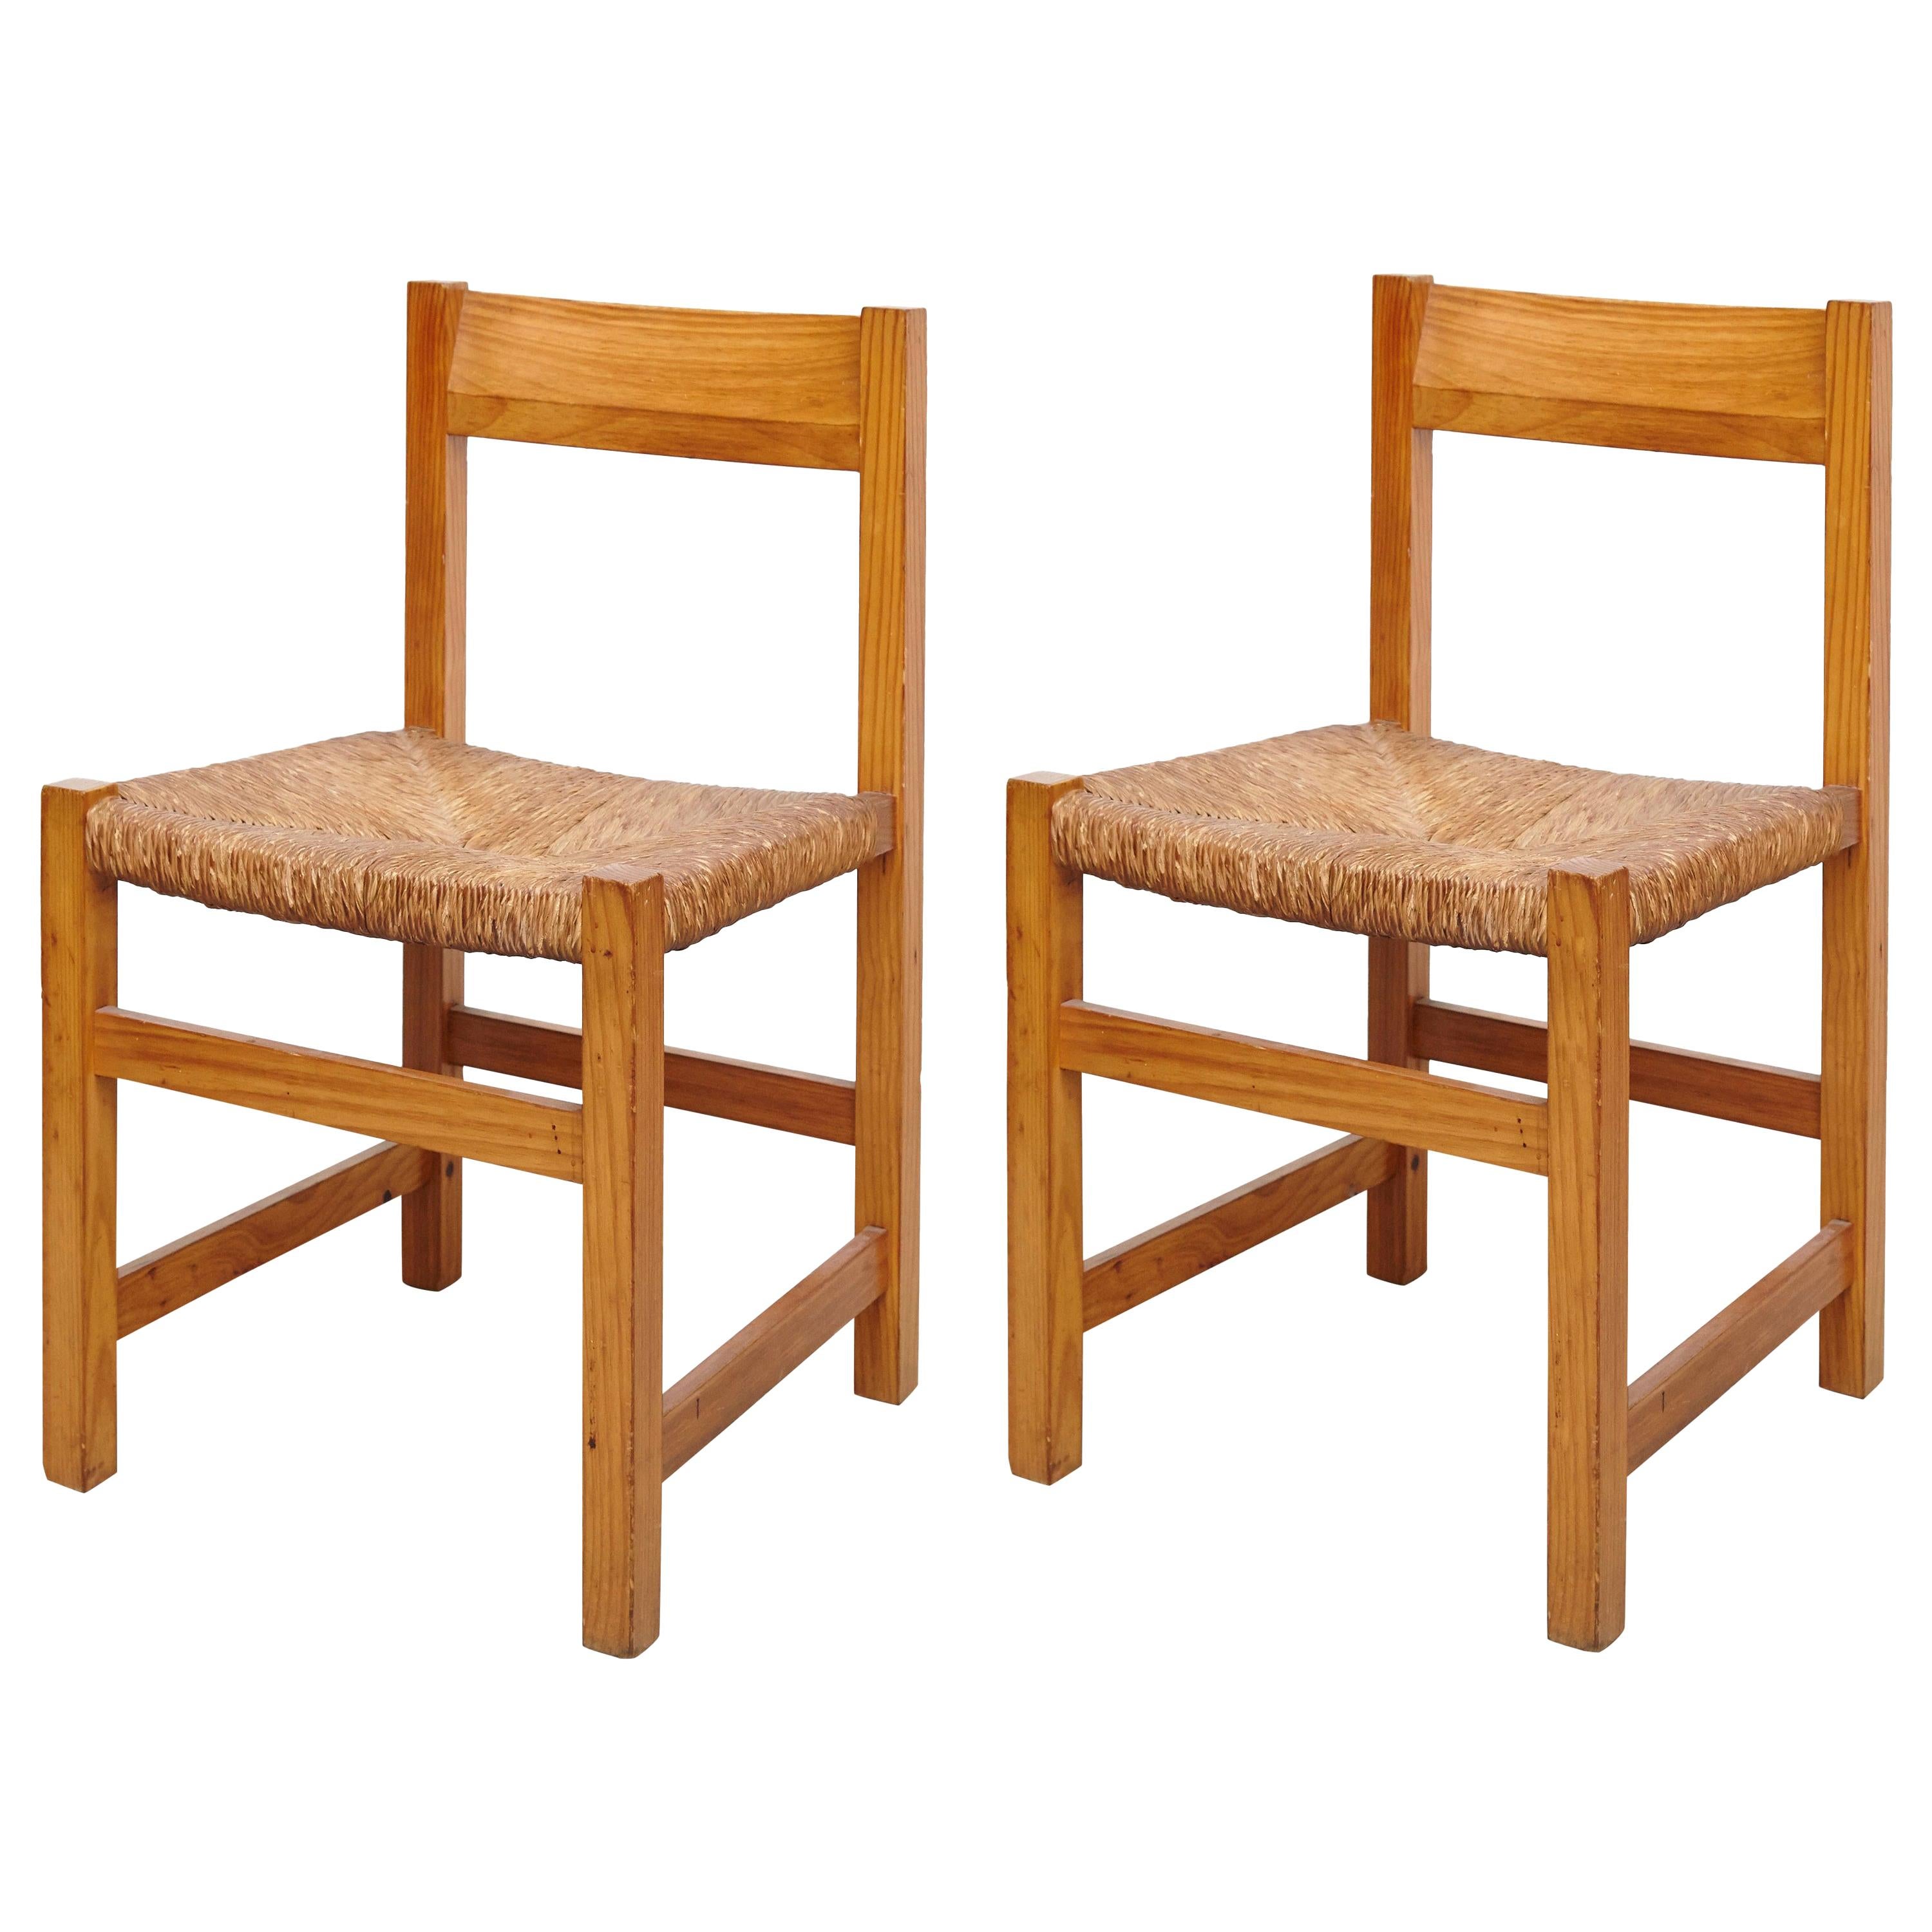 Pair of Spanish Chairs from 1950s